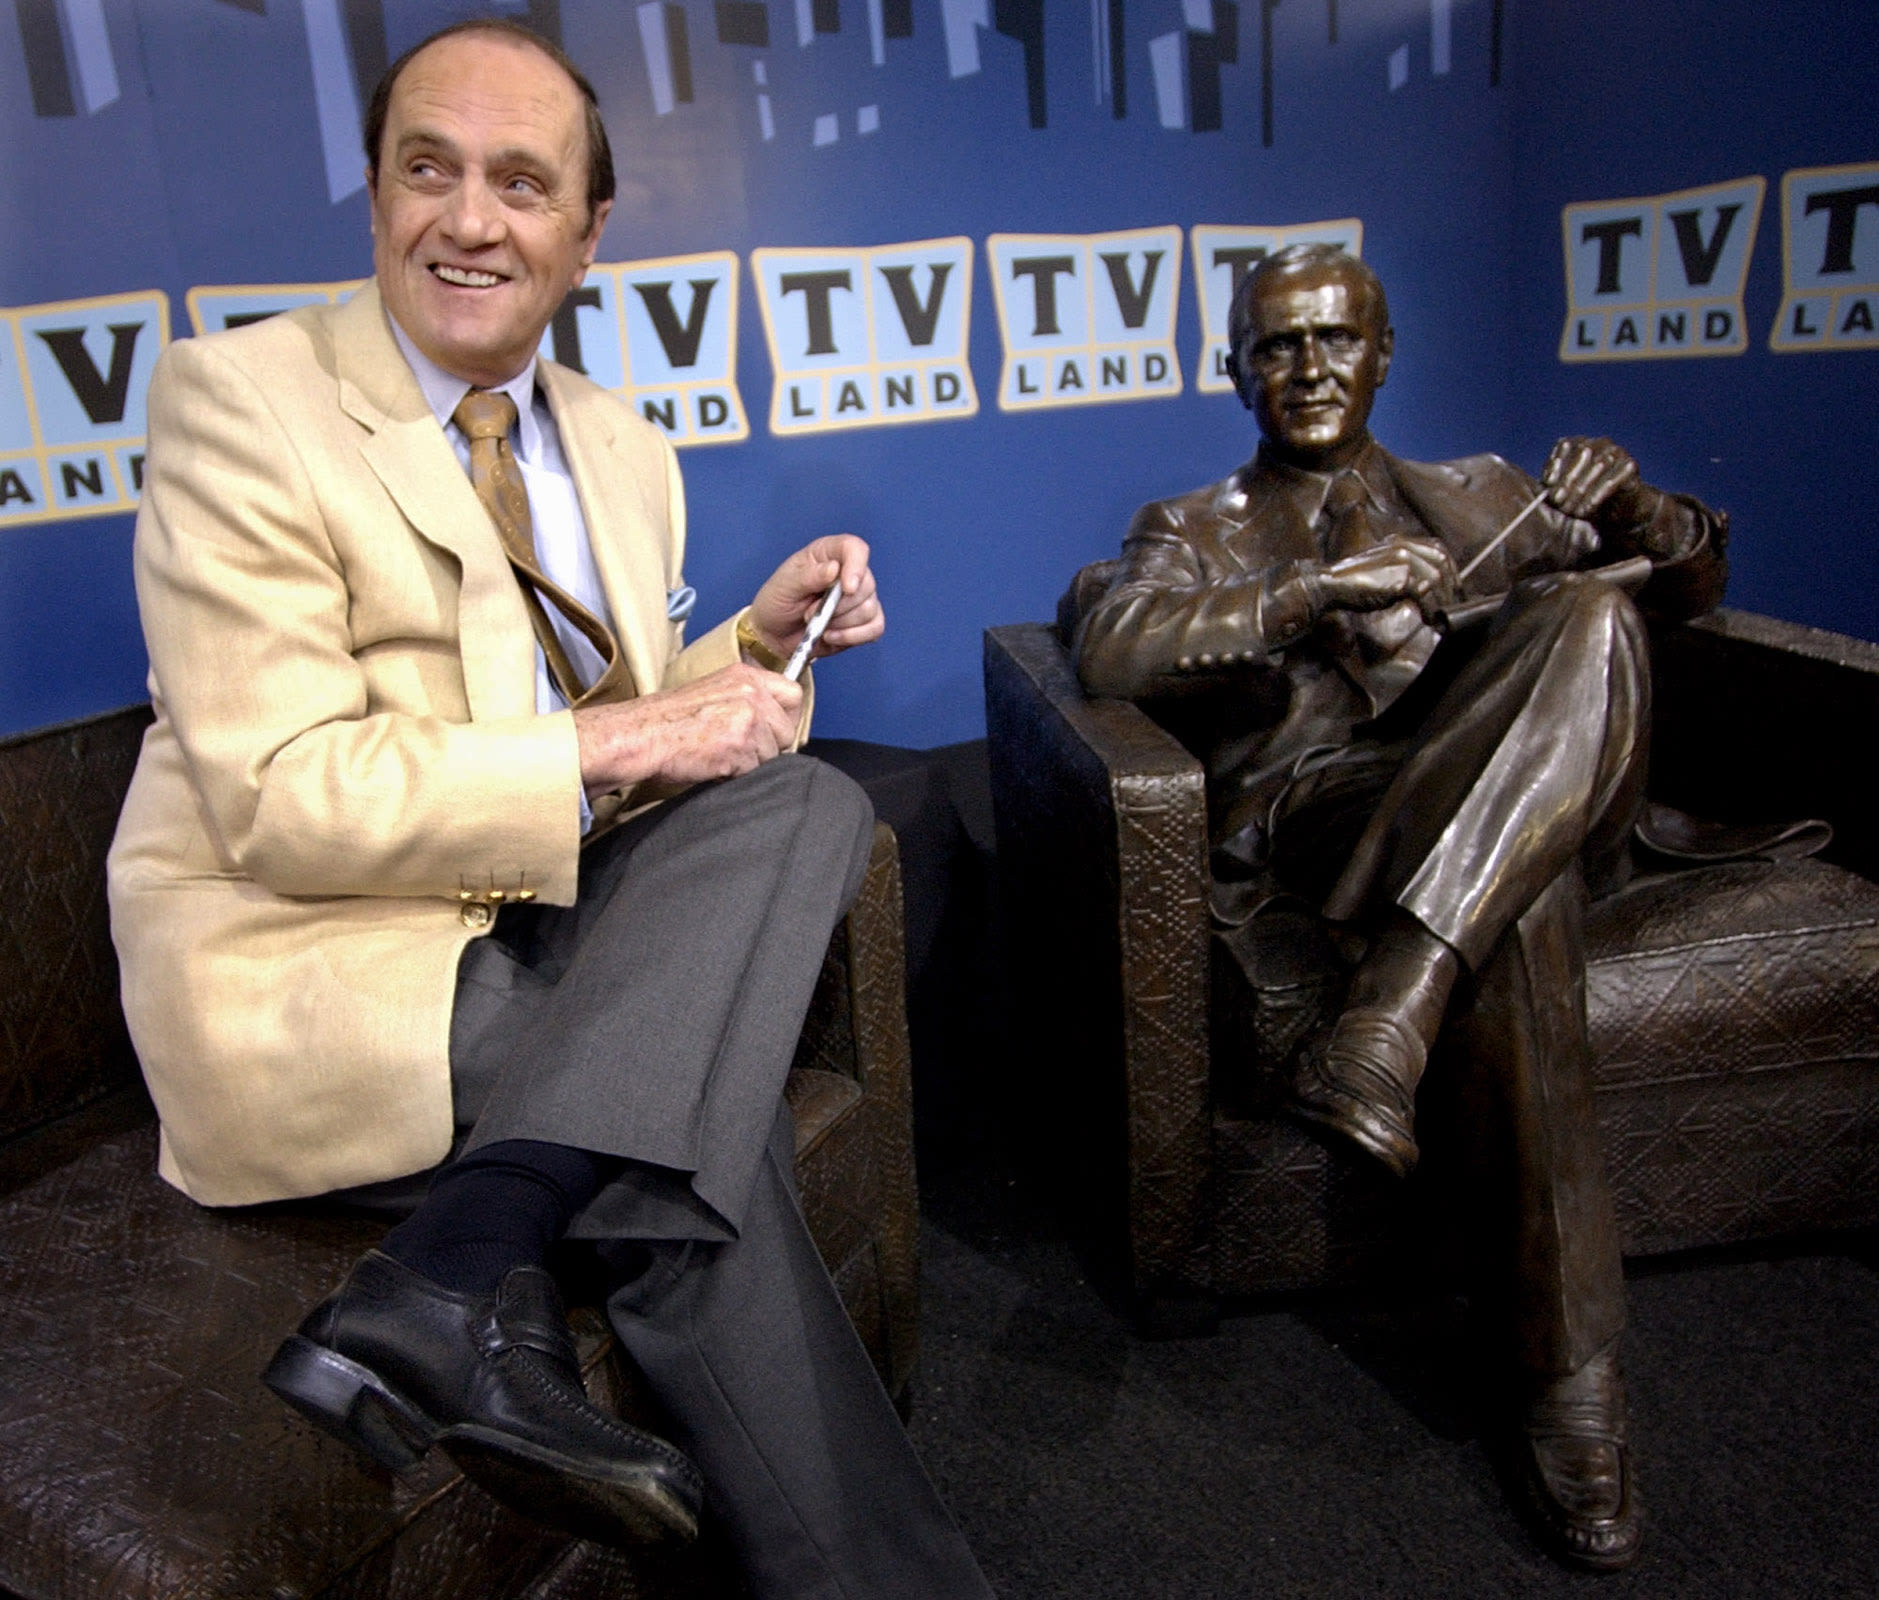 Bob Newhart, who went from standup comedy to sitcom star, dies at 94